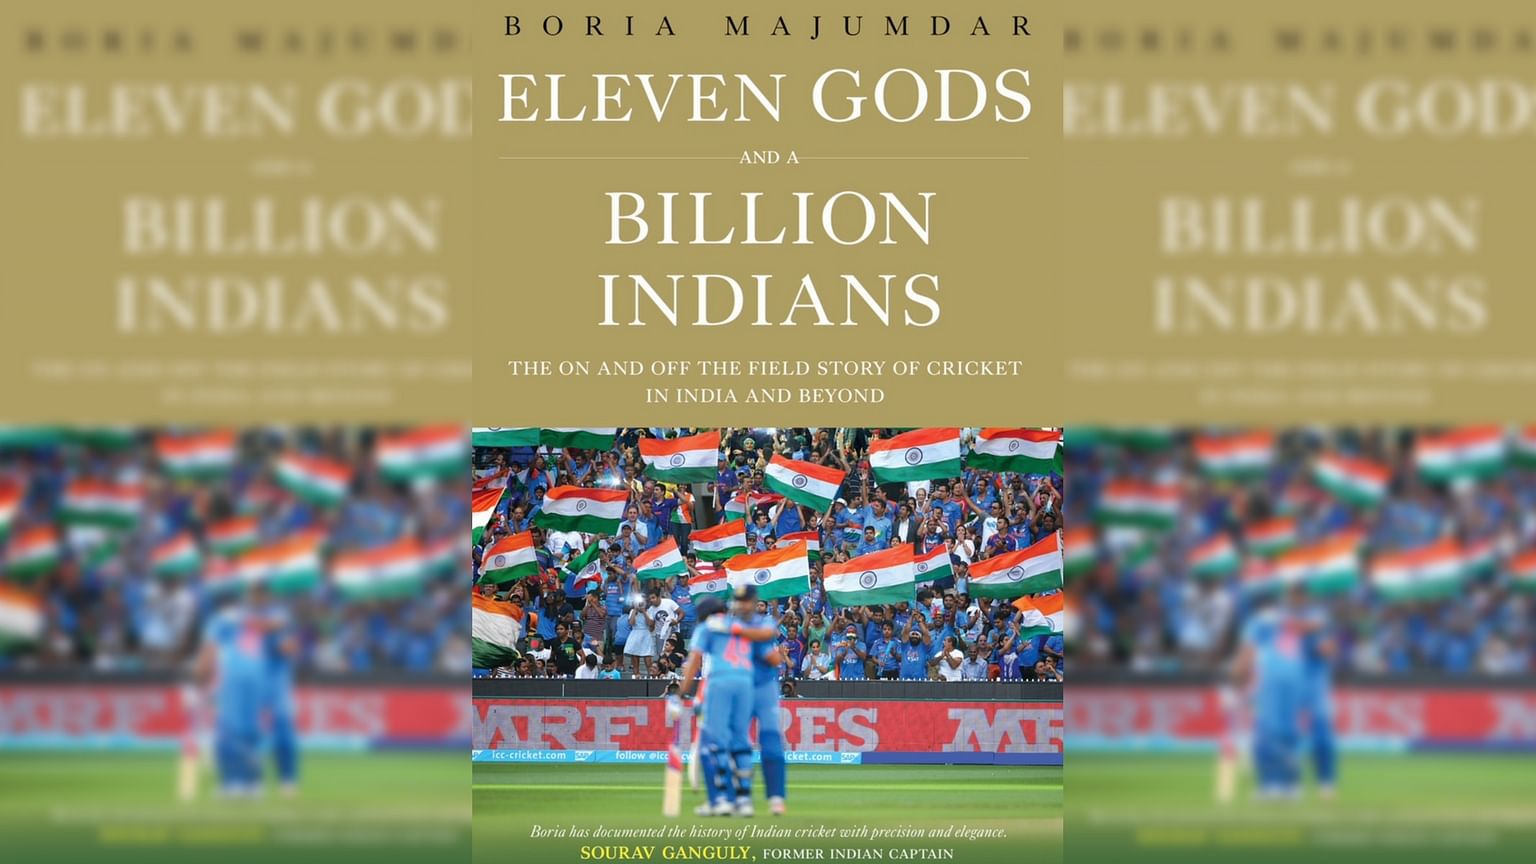 The cover of the book<i> Eleven Gods and a Billion Indians: The On and Off the Field Story of Cricket in India and Beyond</i>.